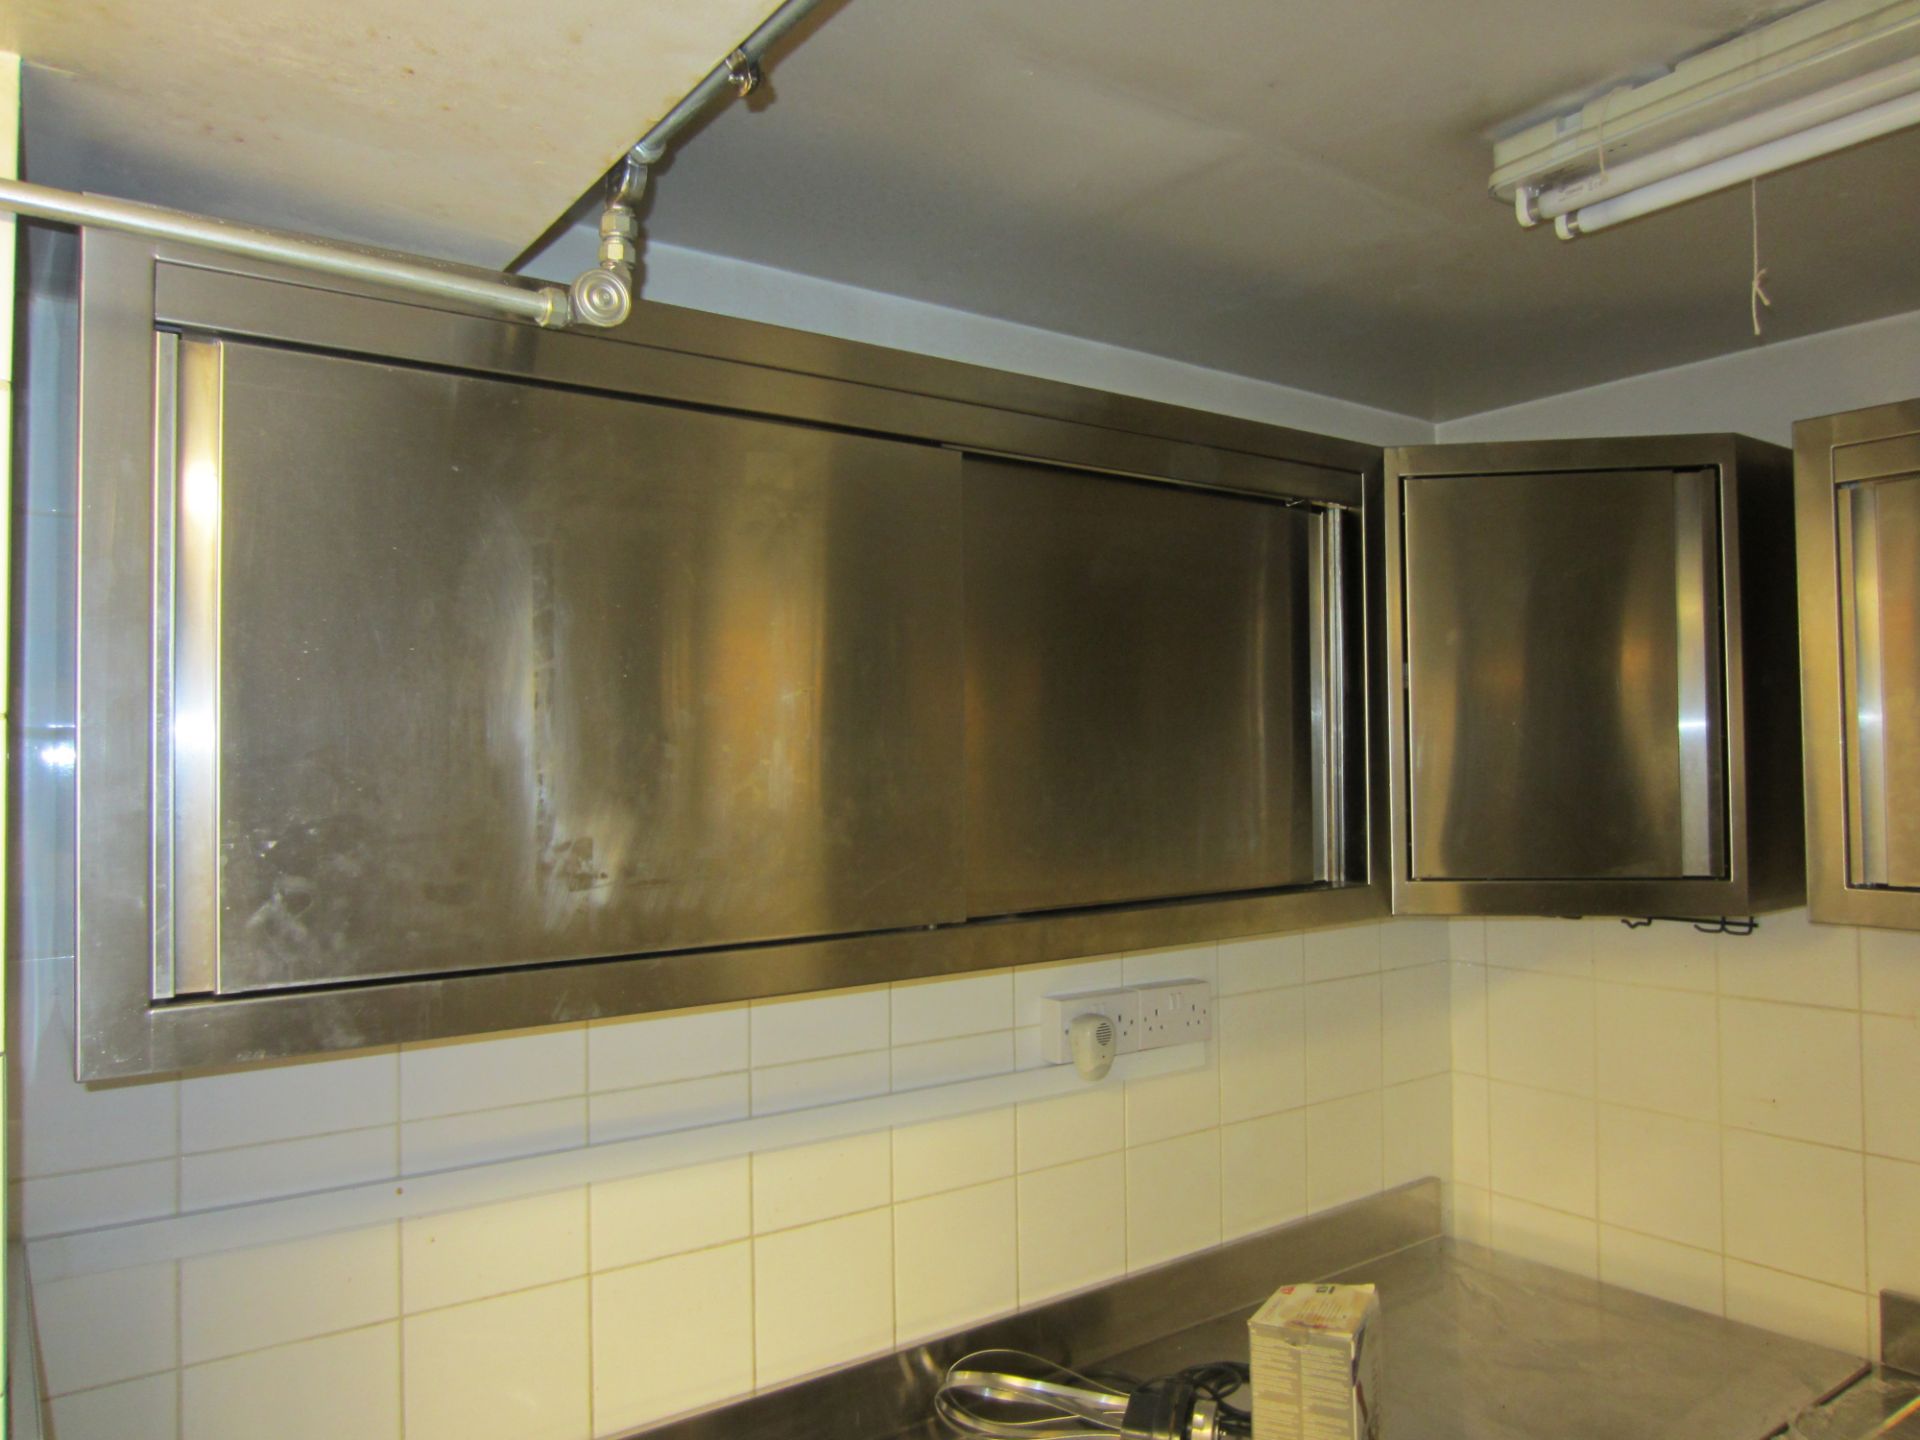 Two Stainless Steel Wall Mounted Fitting Wall Cupboards With Sliding Doors & Two Corner Cupboards